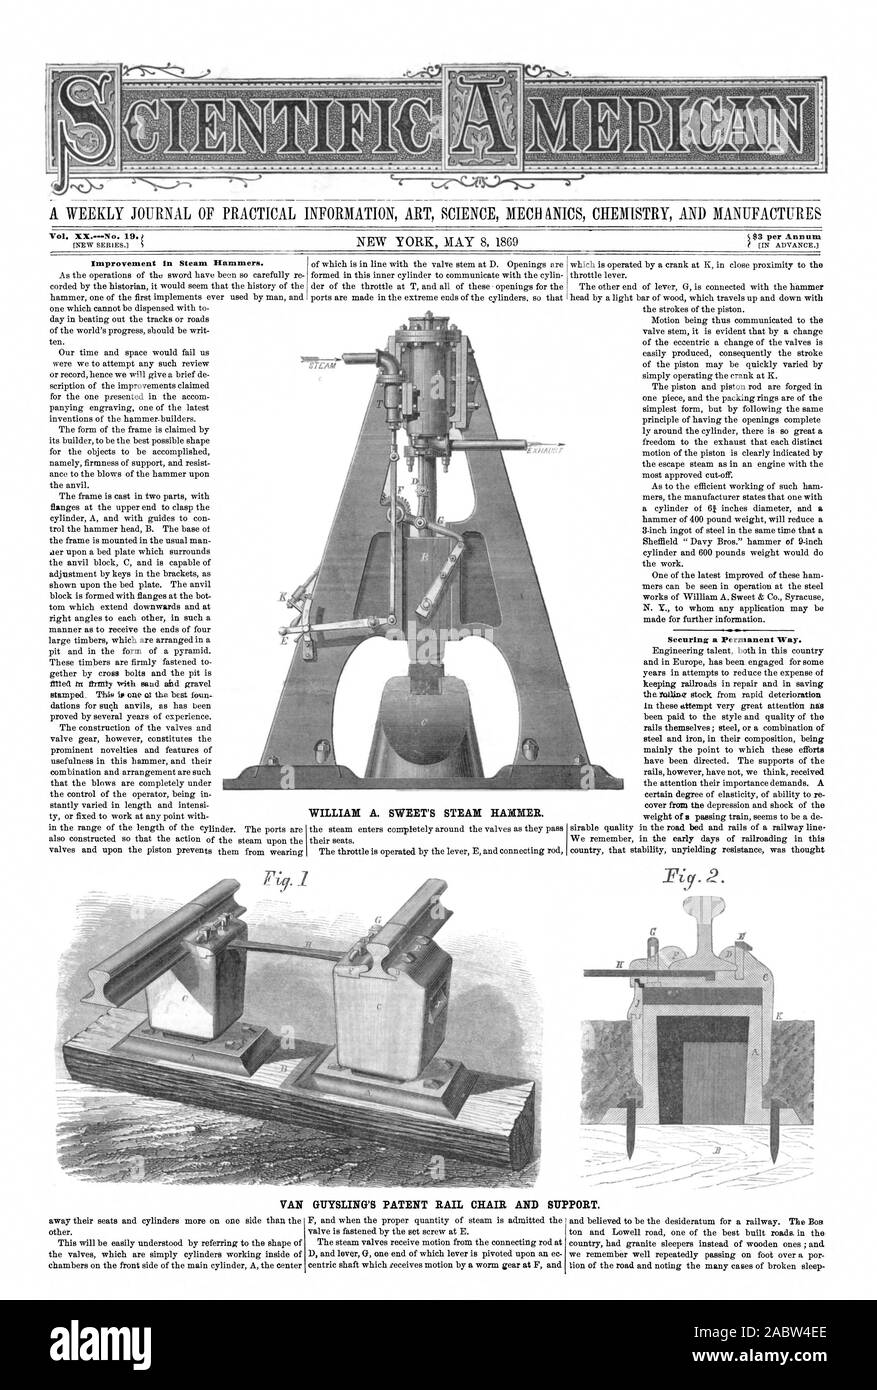 Improvement in Steam Hammers. WILLIAM A. SWEET'S STEAM HAMMER. Securing a permanent Way. GUYSLING'S PATENT RAIL CHAIR AND SUPPORT. VAN, scientific american, 1869-05-08 Stock Photo